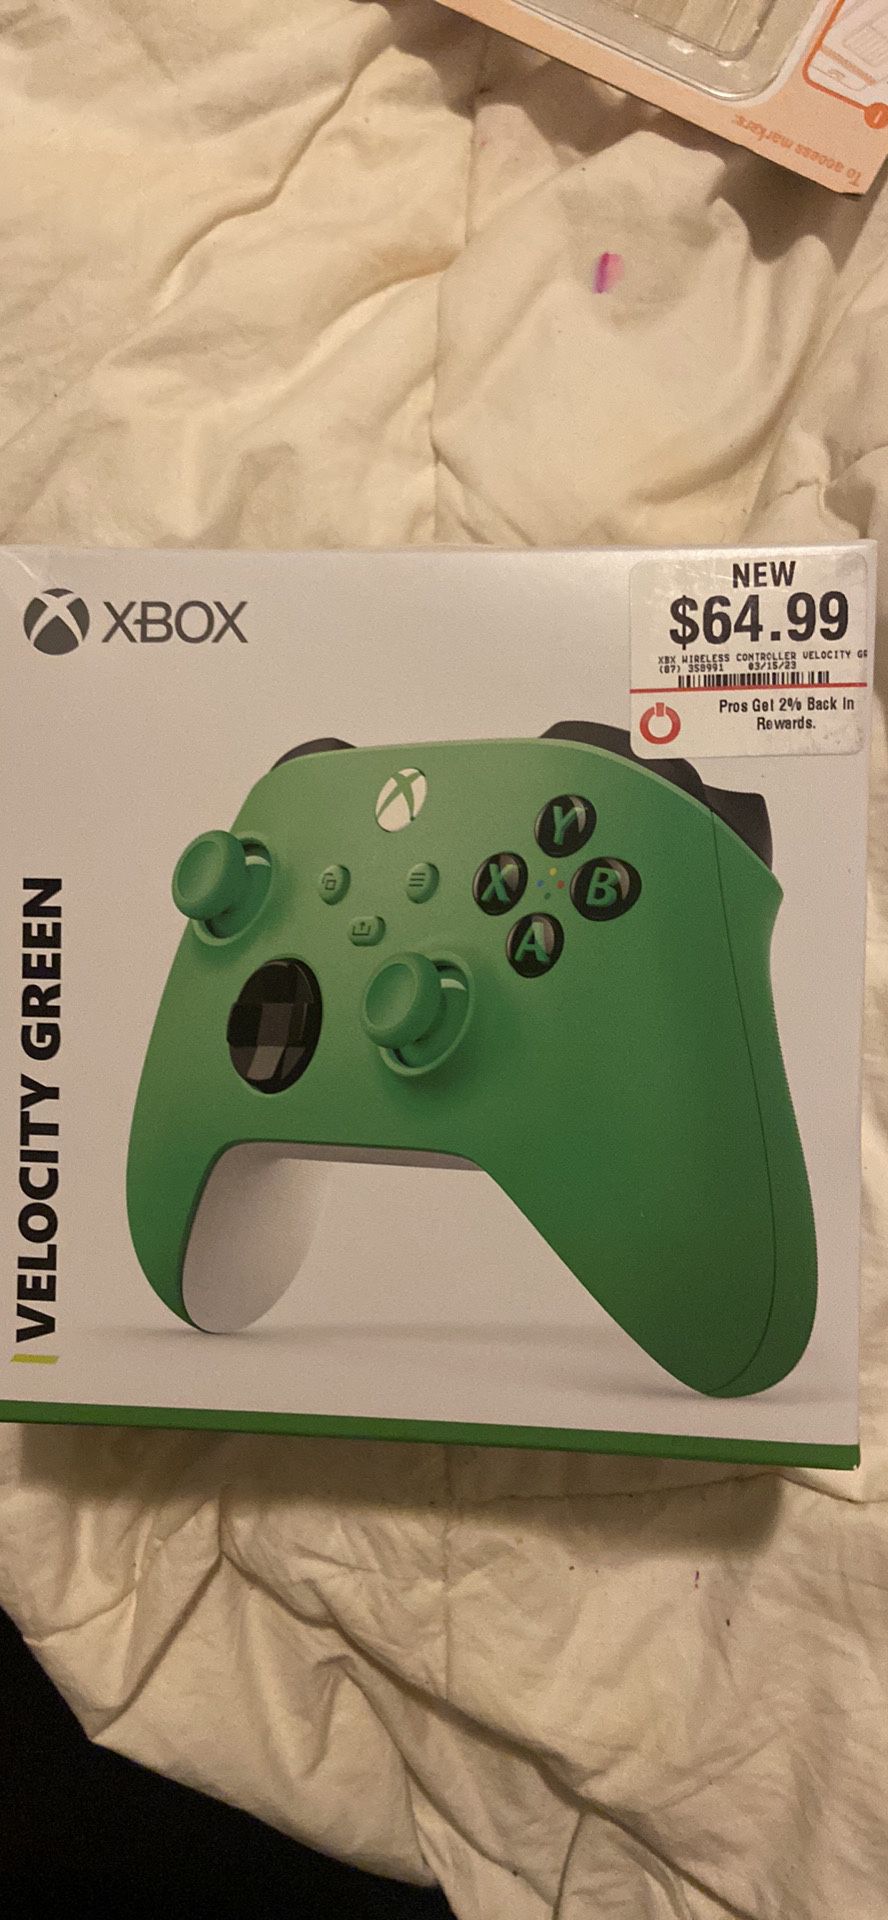 Velocity - NY Sale for OfferUp Brooklyn, Xbox Green in Controller